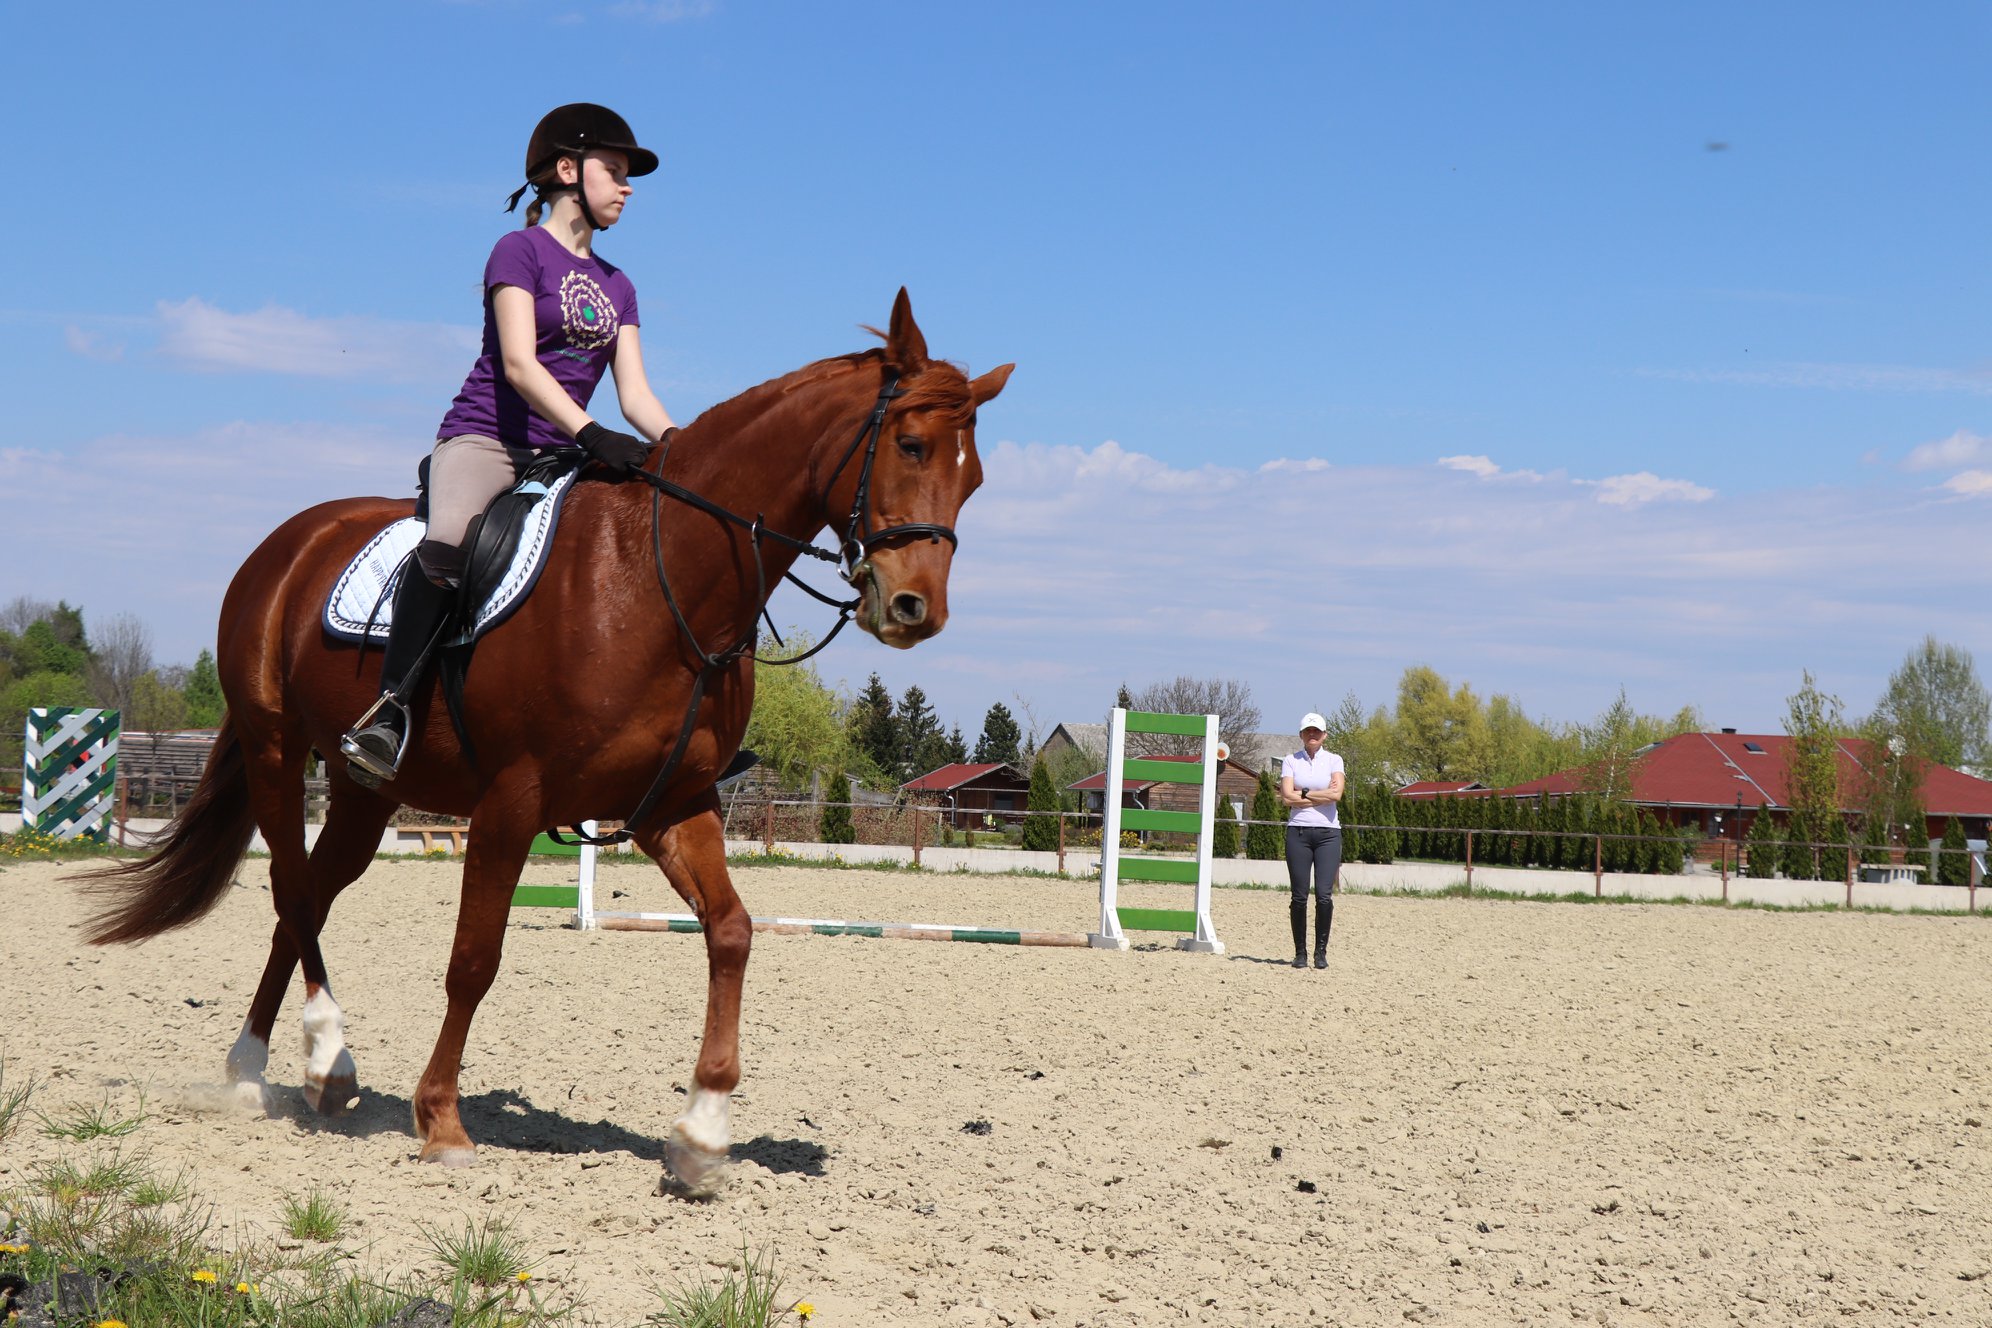 How to Choose a Riding School? Part 2: Personality and Attitude of the Riding Instructor